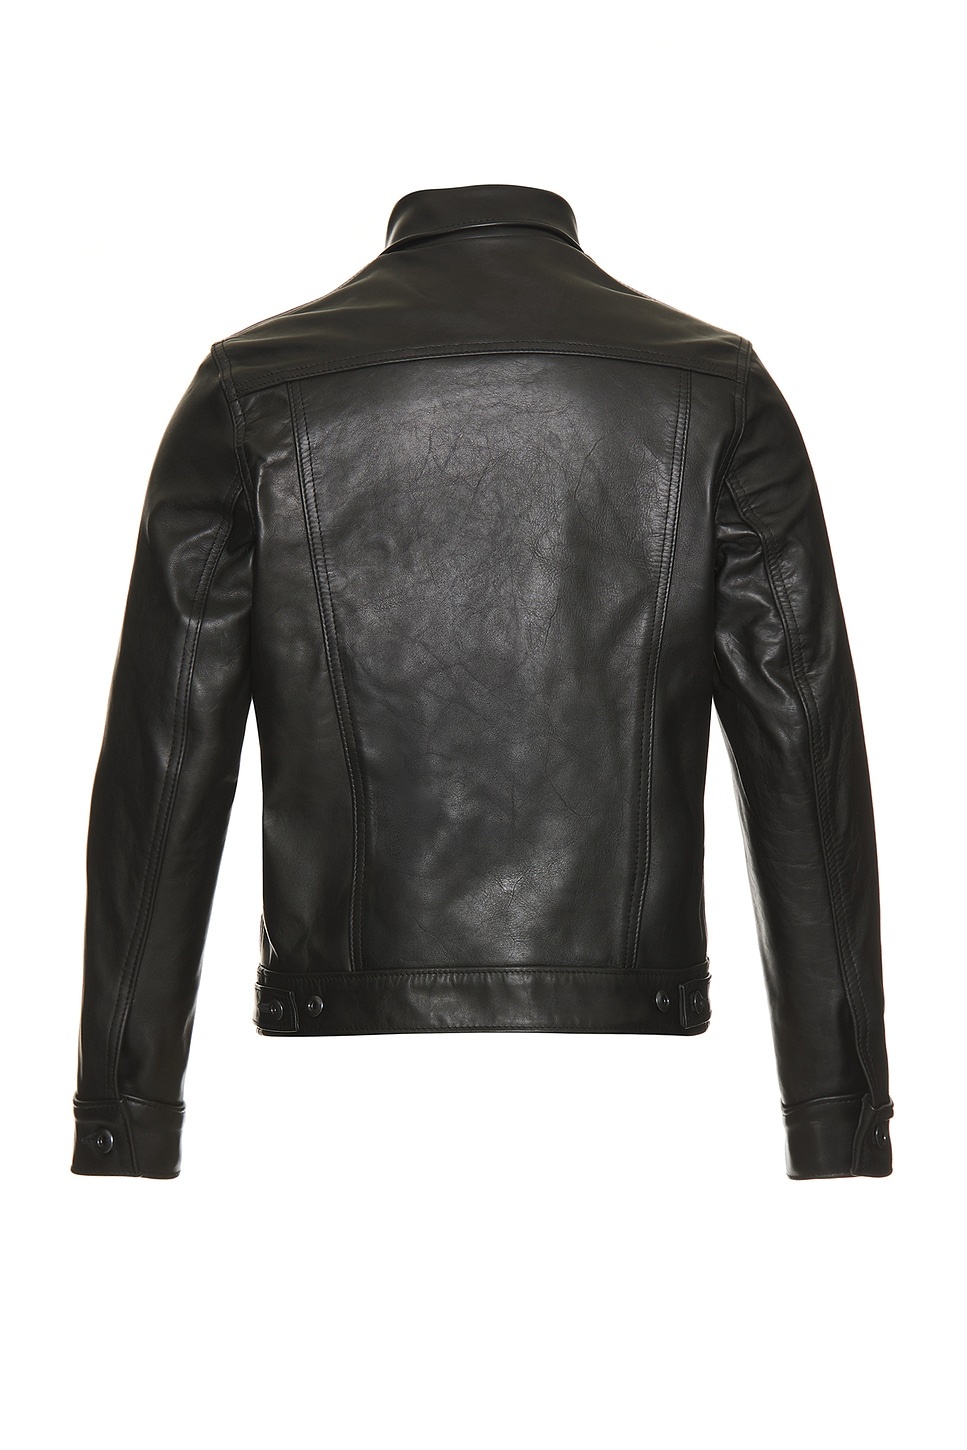 Naked Cowhide Jean Style Jacket - 2